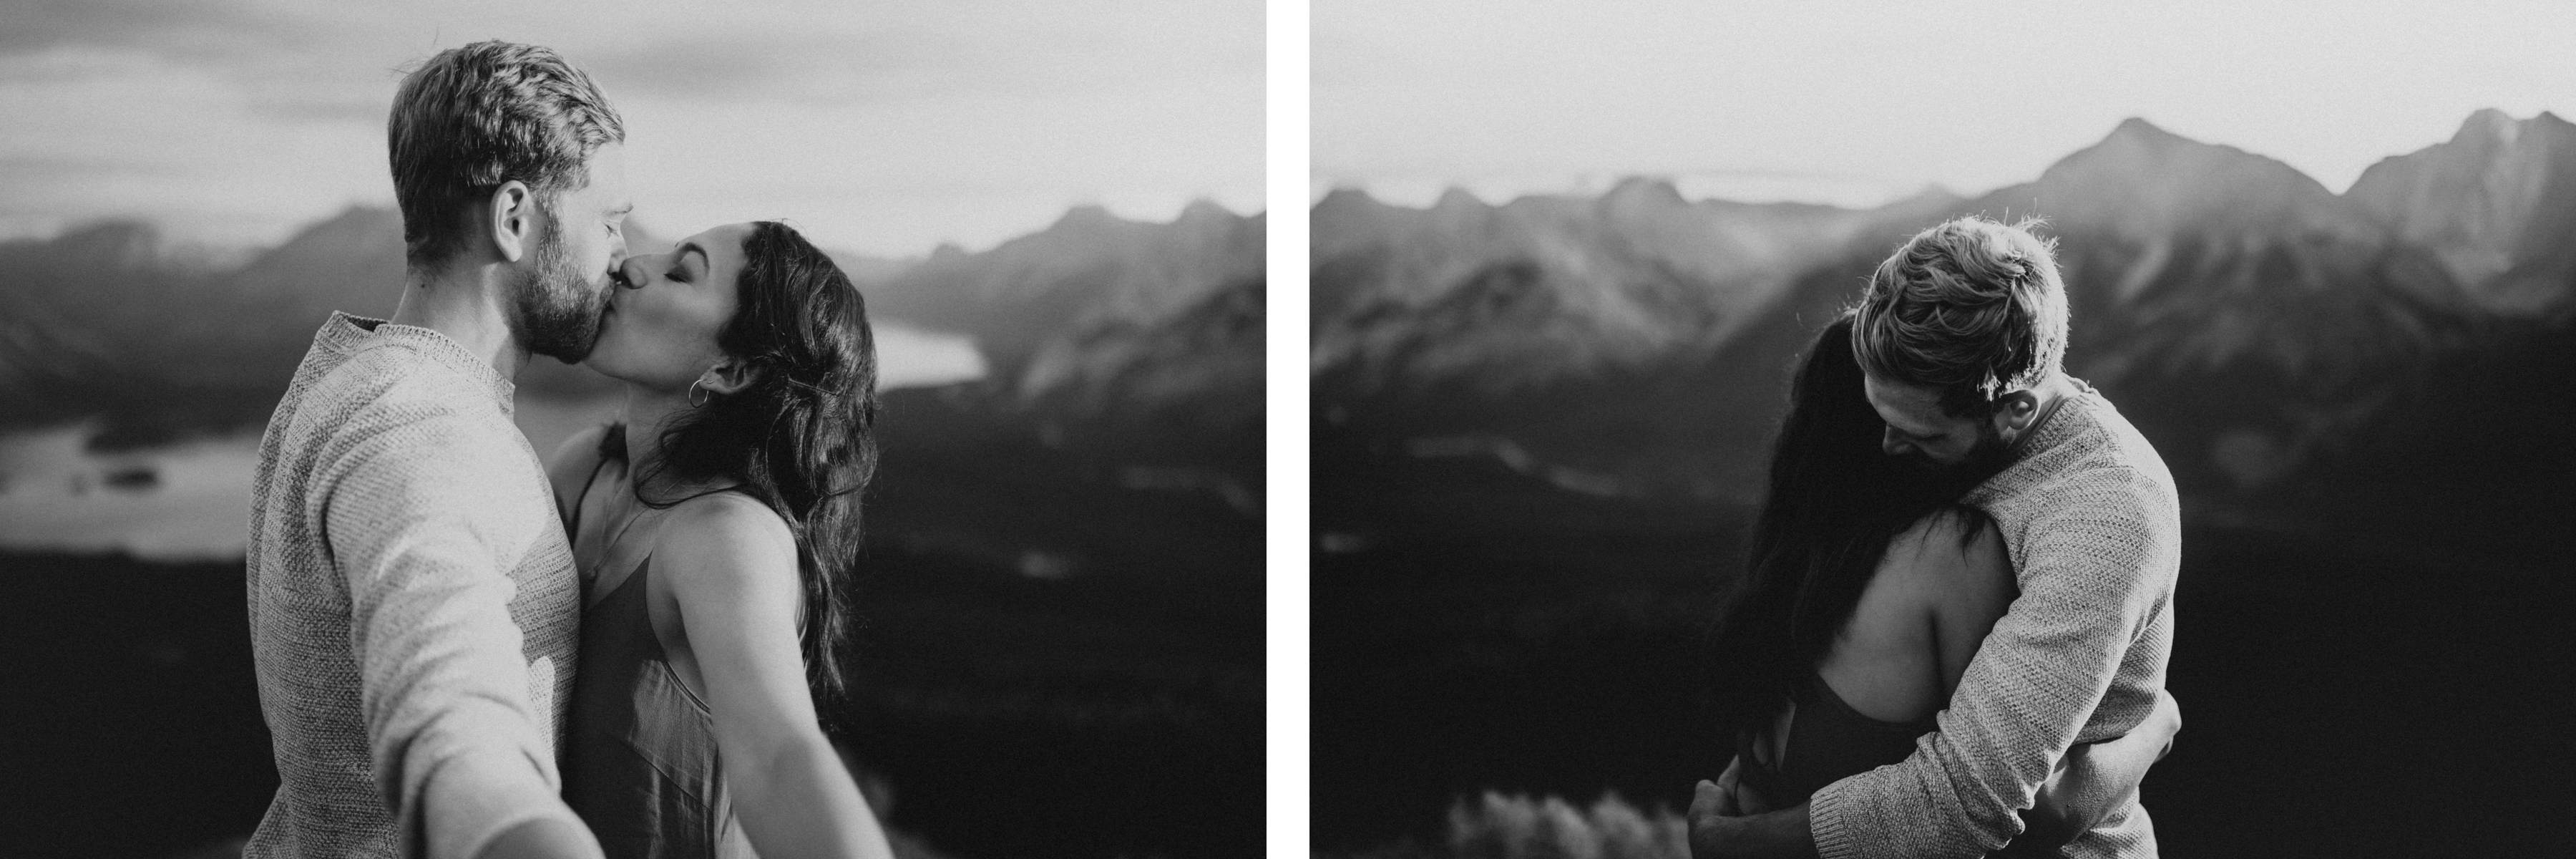 Canmore hiking engagement photos in Kananaskis Country - Image 27